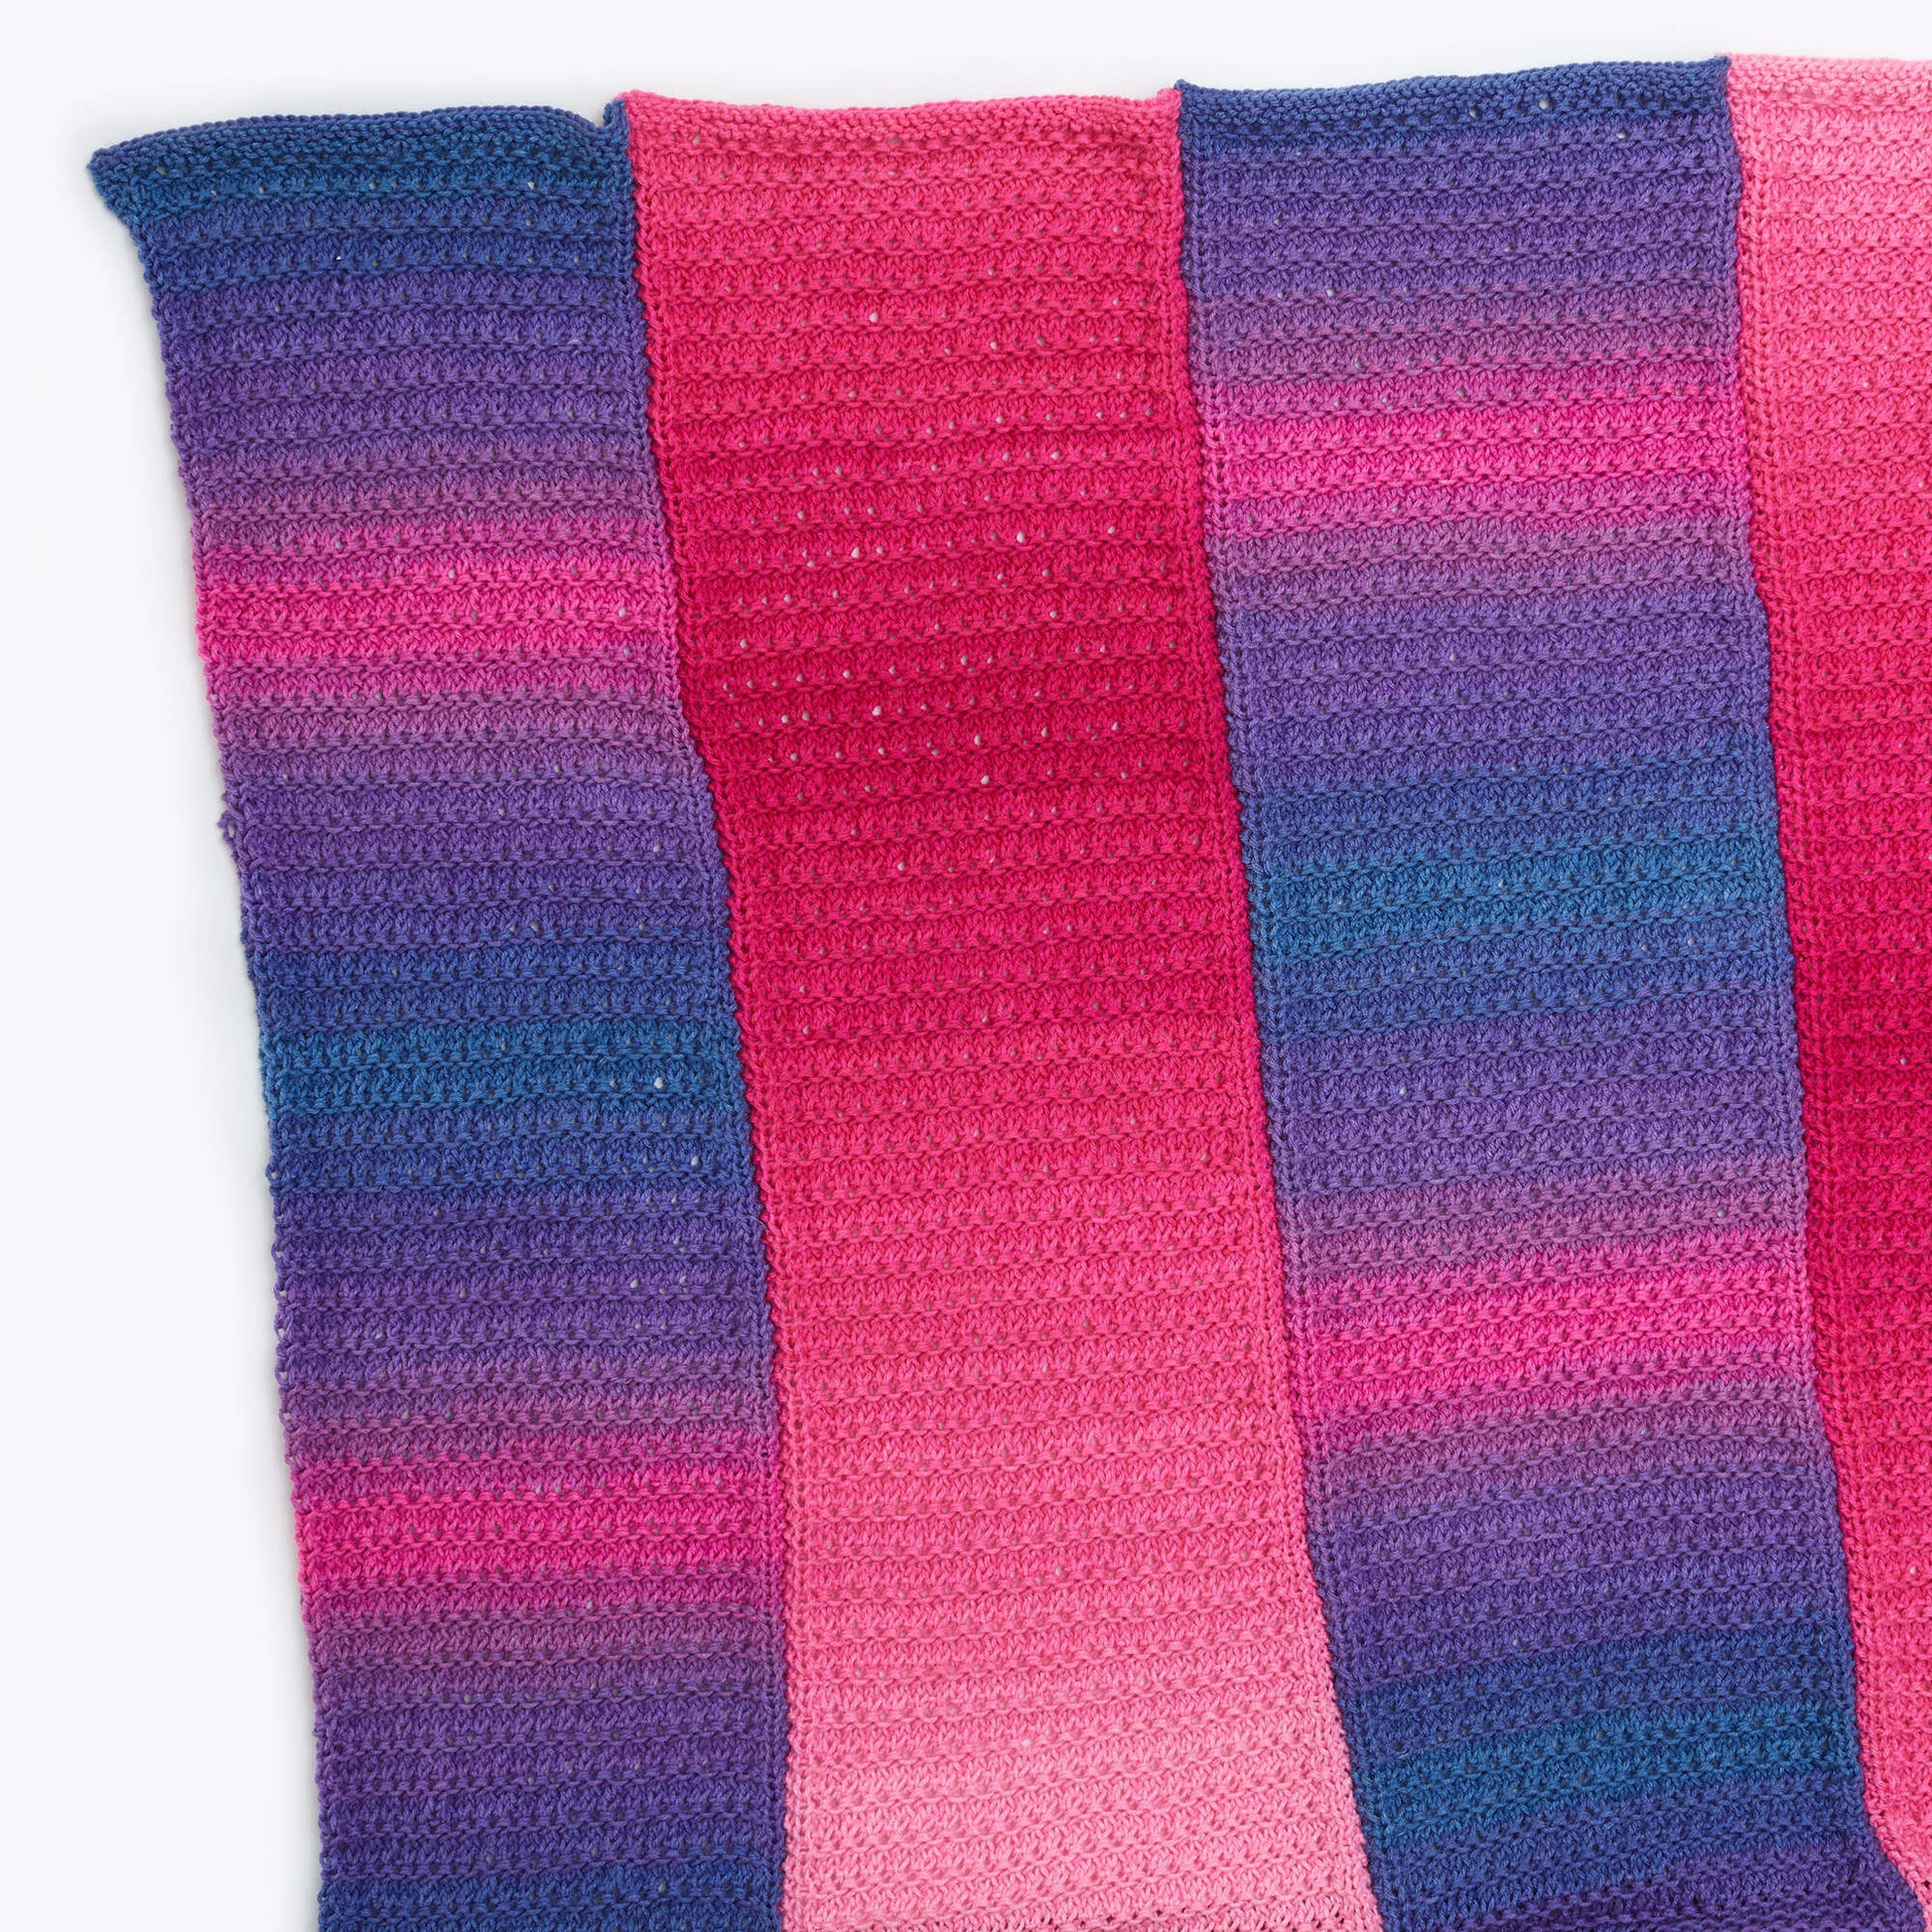 Free Red Heart Dynamic Knit Ombre Throw Pattern